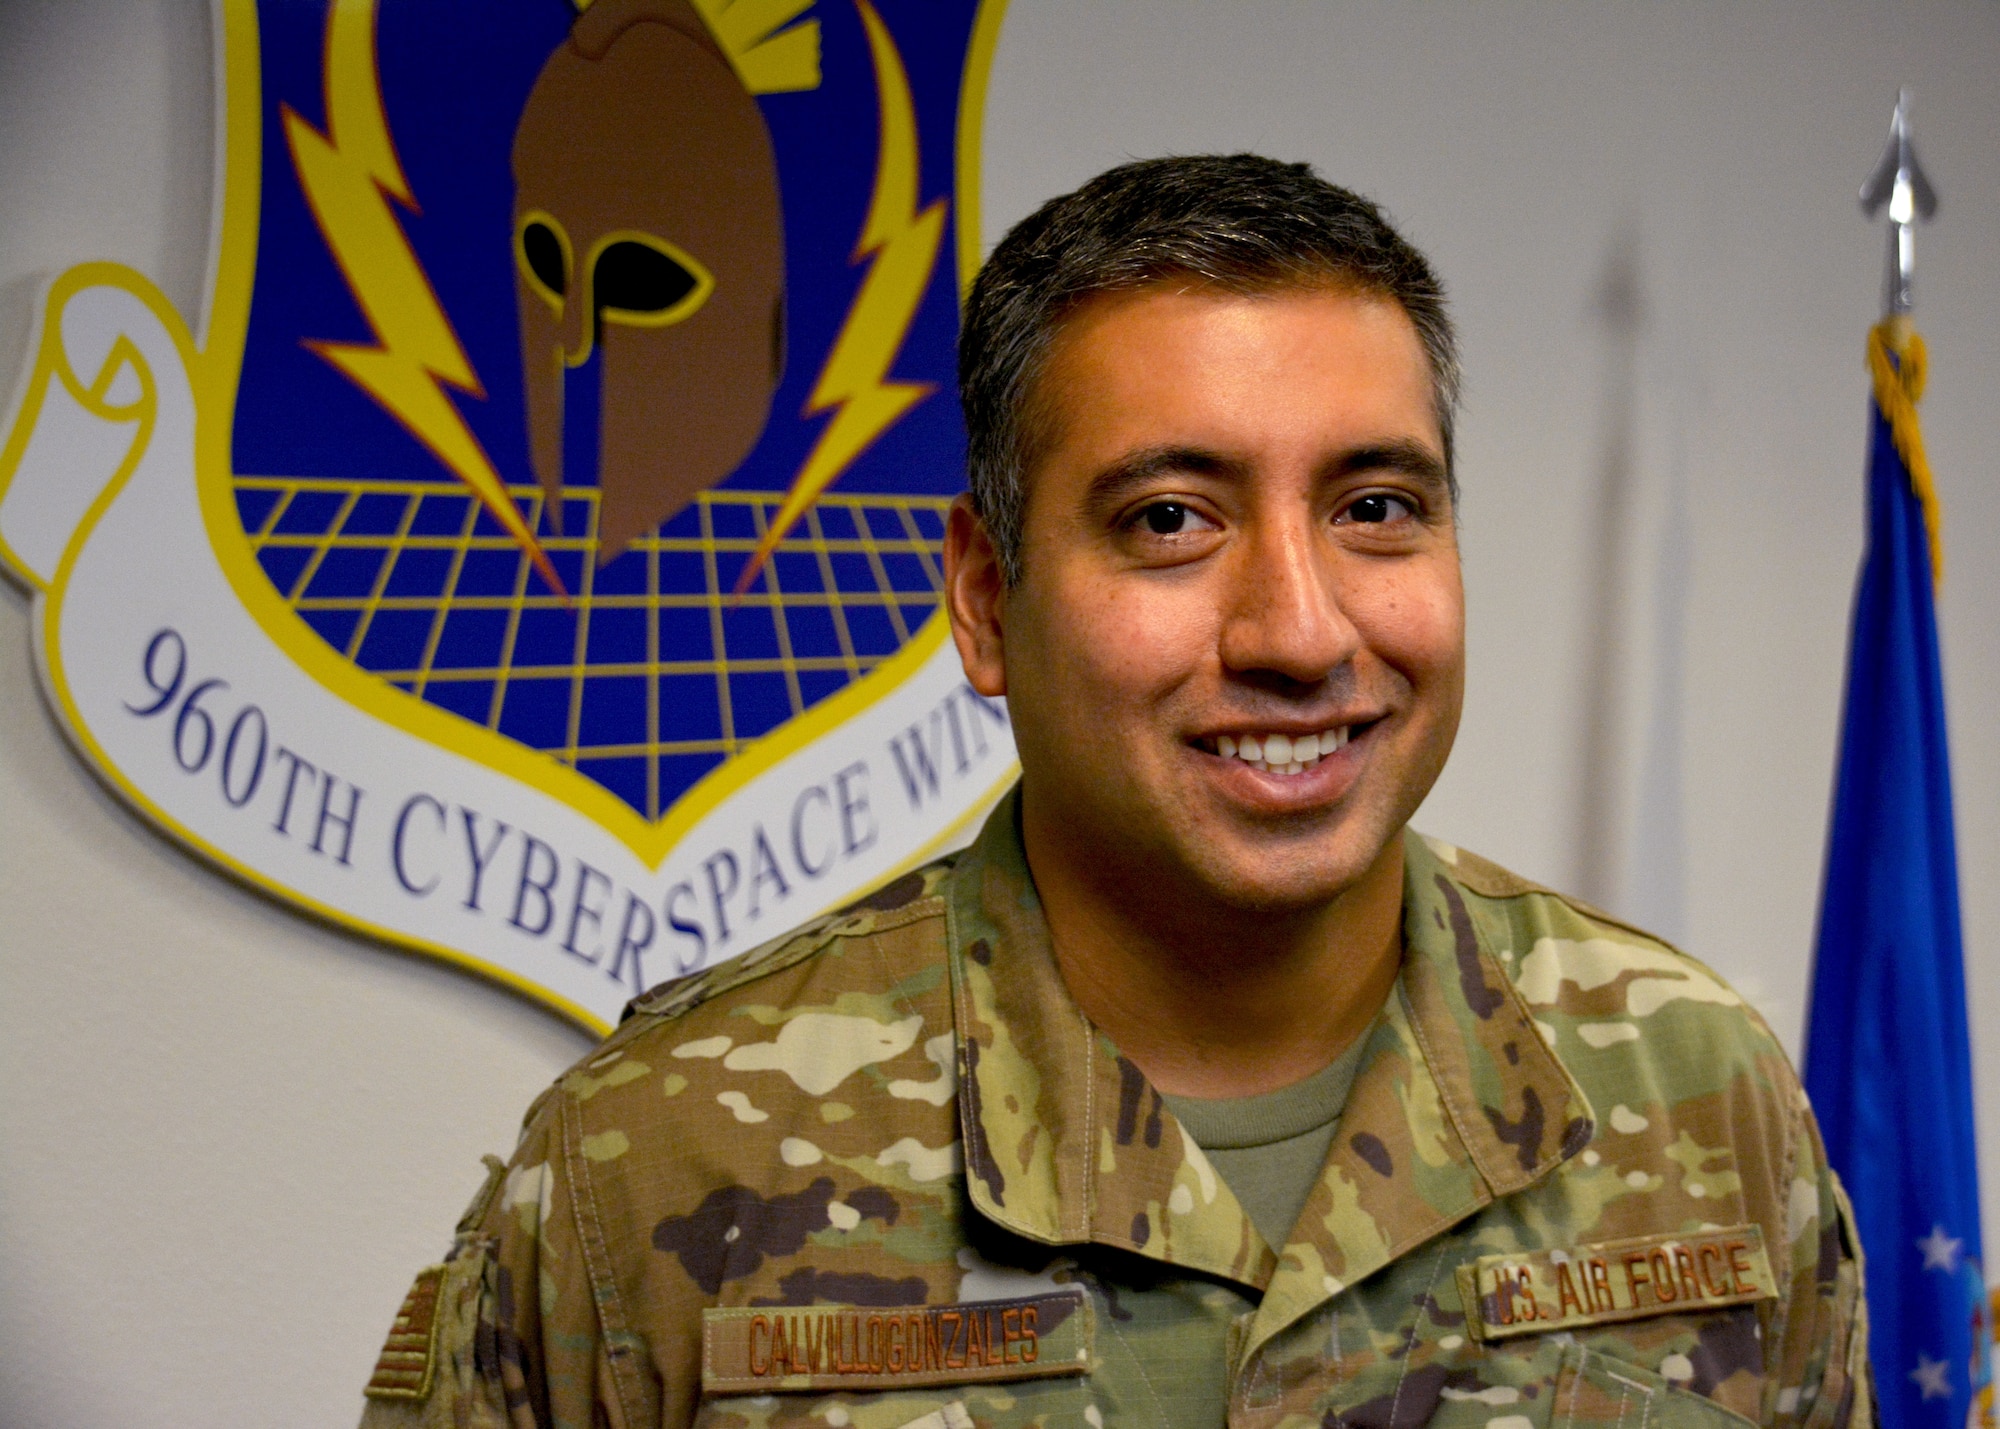 Tech. Sgt. Dominic CalvilloGonzales, 426th Network Warfare Squadron operations training specialist, stands for a photograph Oct. 28, 2020, at Joint Base San Antonio-Chapman Training Annex, Texas. (U.S. Air Force photo by Samantha Mathison)